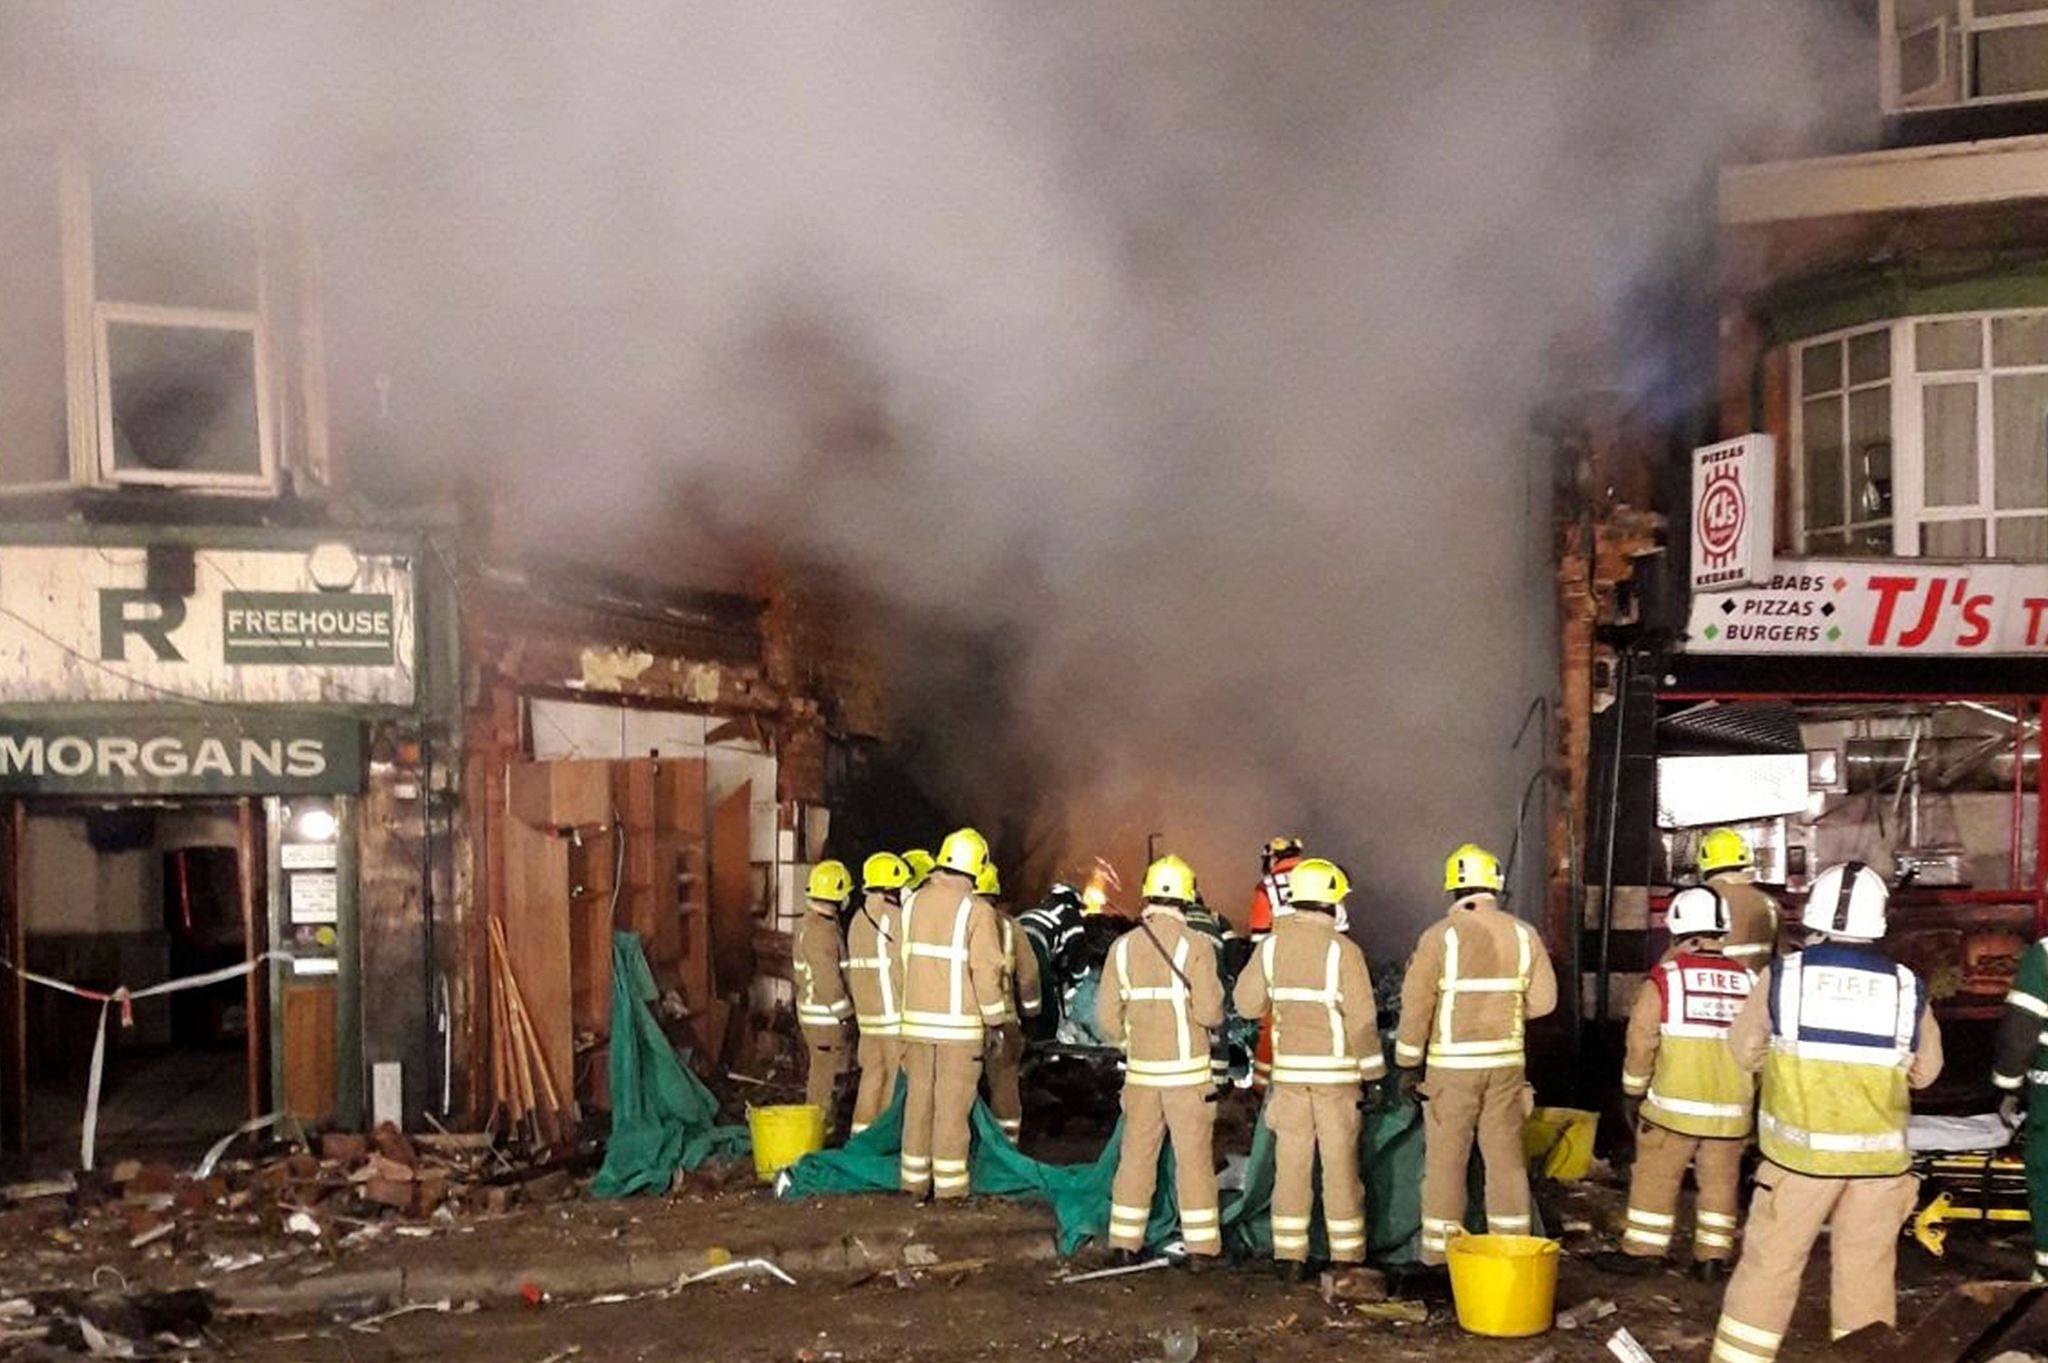 A handout picture released by Leicestershire Fire and Rescue Service on February 26, 2018 shows members of the emergency services attending the scene of an explosion in Leicester, central England, on February 25, 2018. 